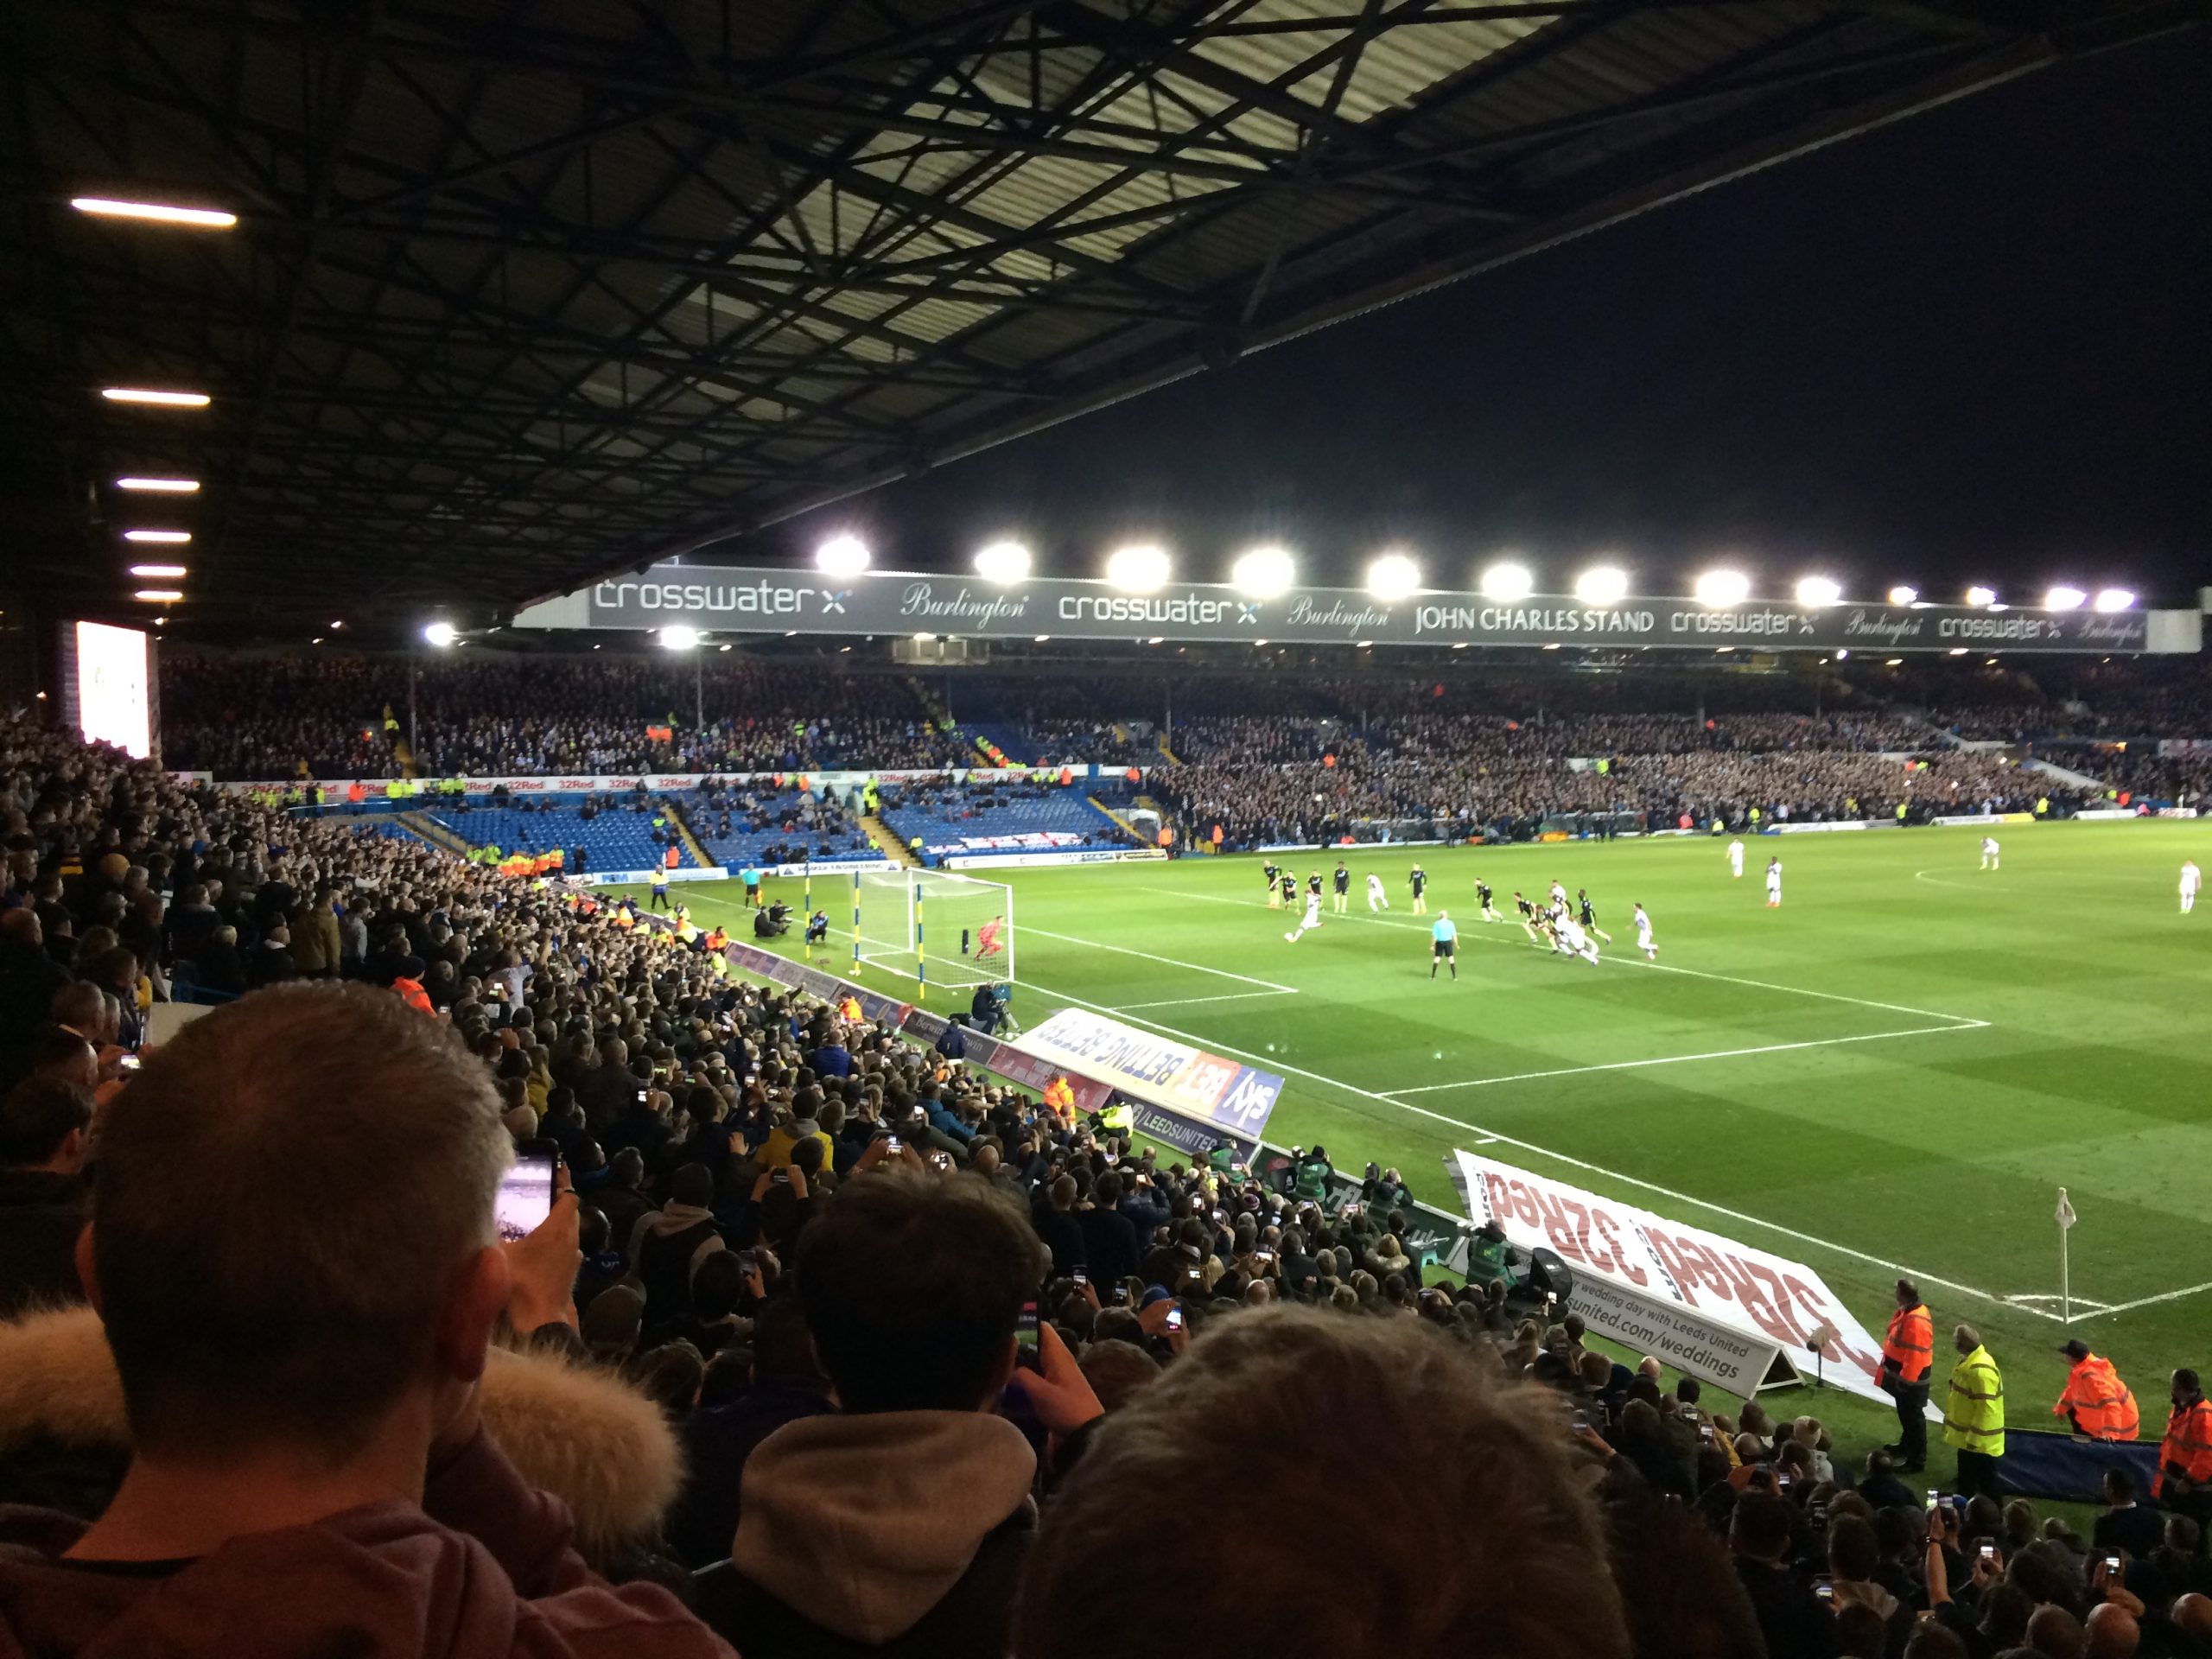 Floodlit action from a football stadium